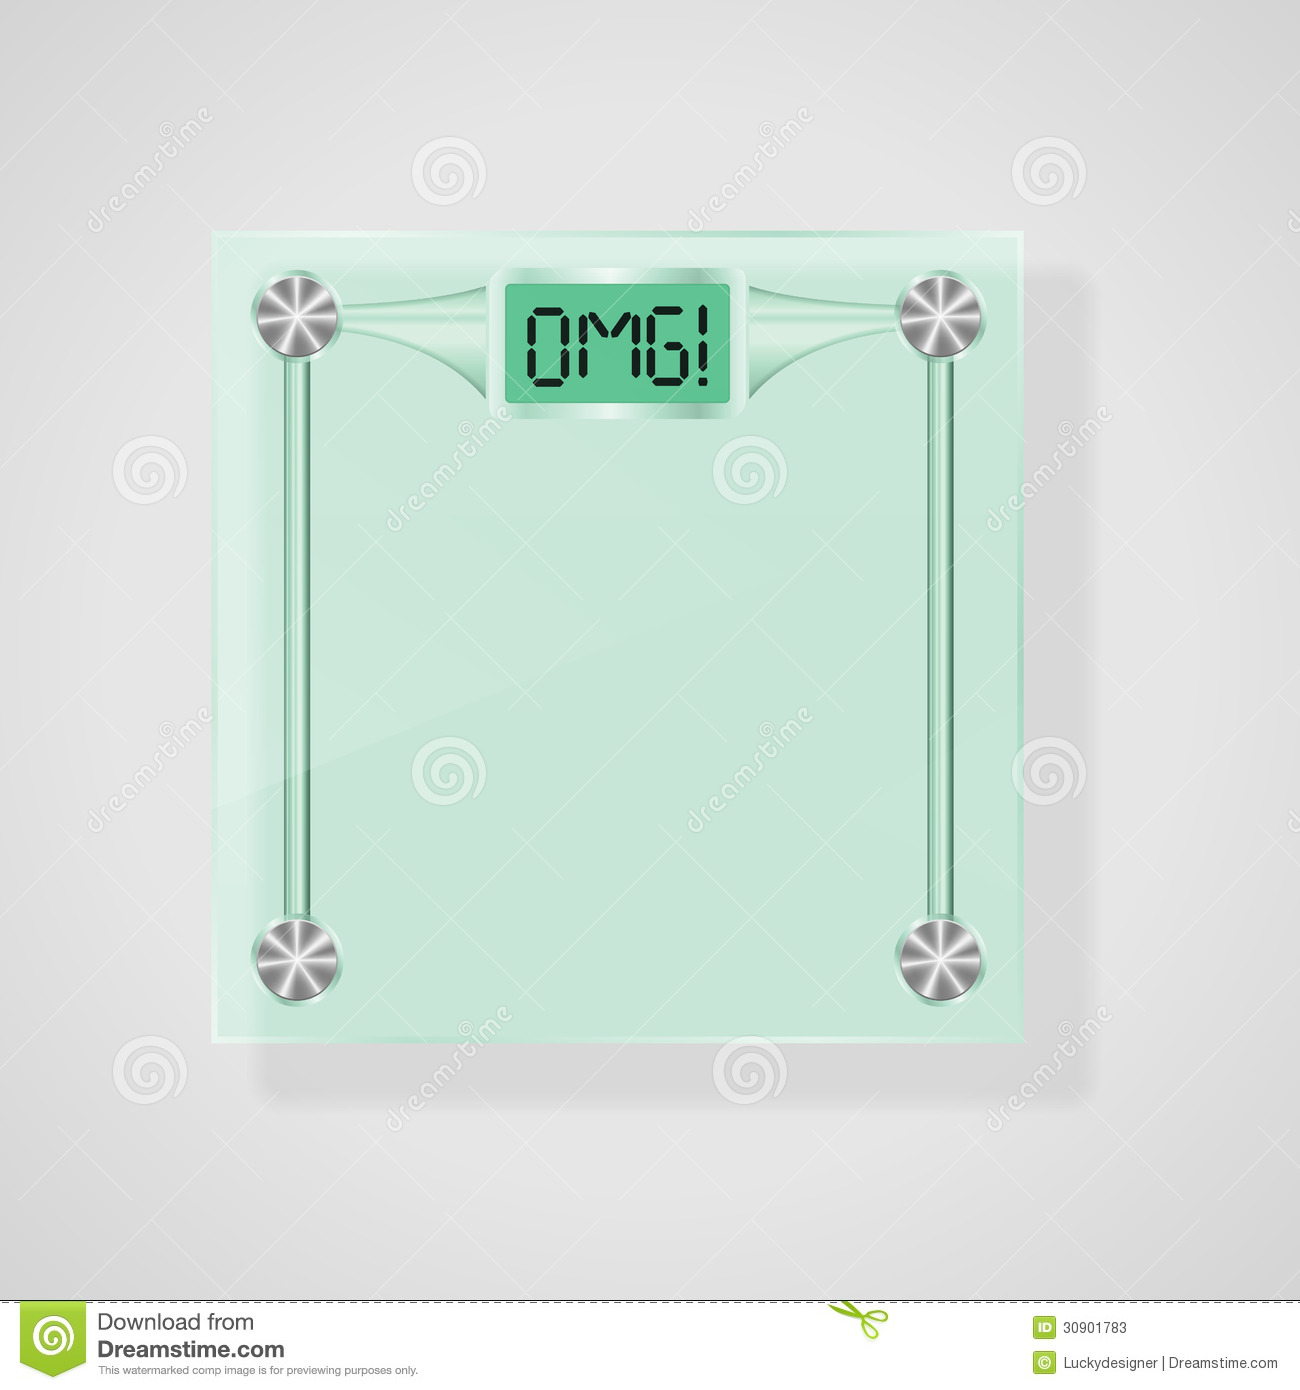 Transparent Glass Scales With Omg  Text  Weight Loss Concept  Vector